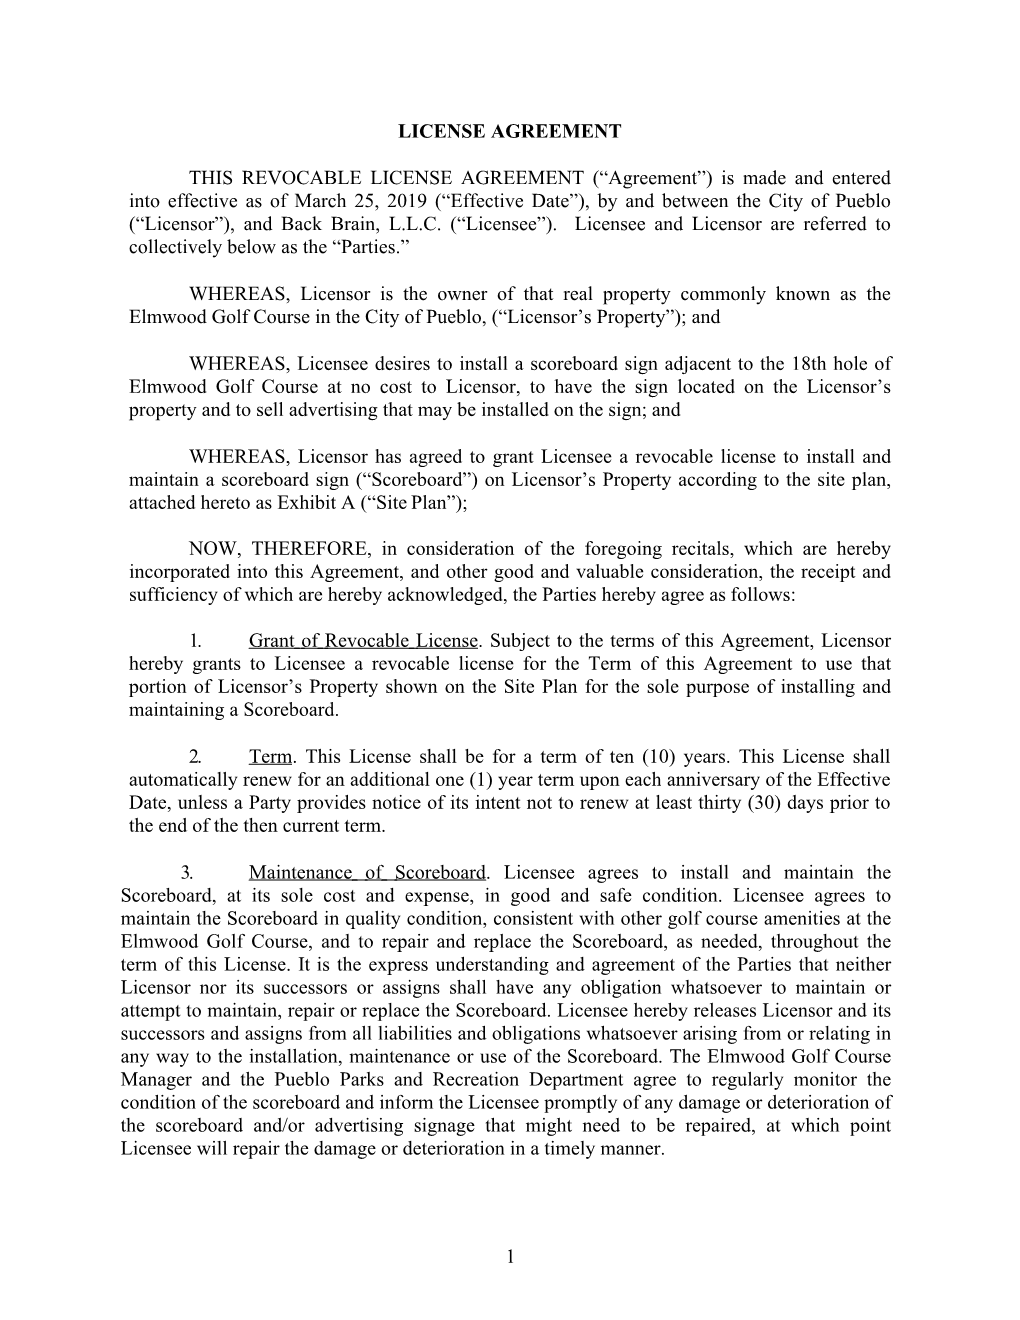 (“Agreement”) Is Made and Entered Into Effective As of March 25, 2019 (“Effective Date”), by and Between the City of Pueblo (“Licensor”), and Back Brain, L.L.C